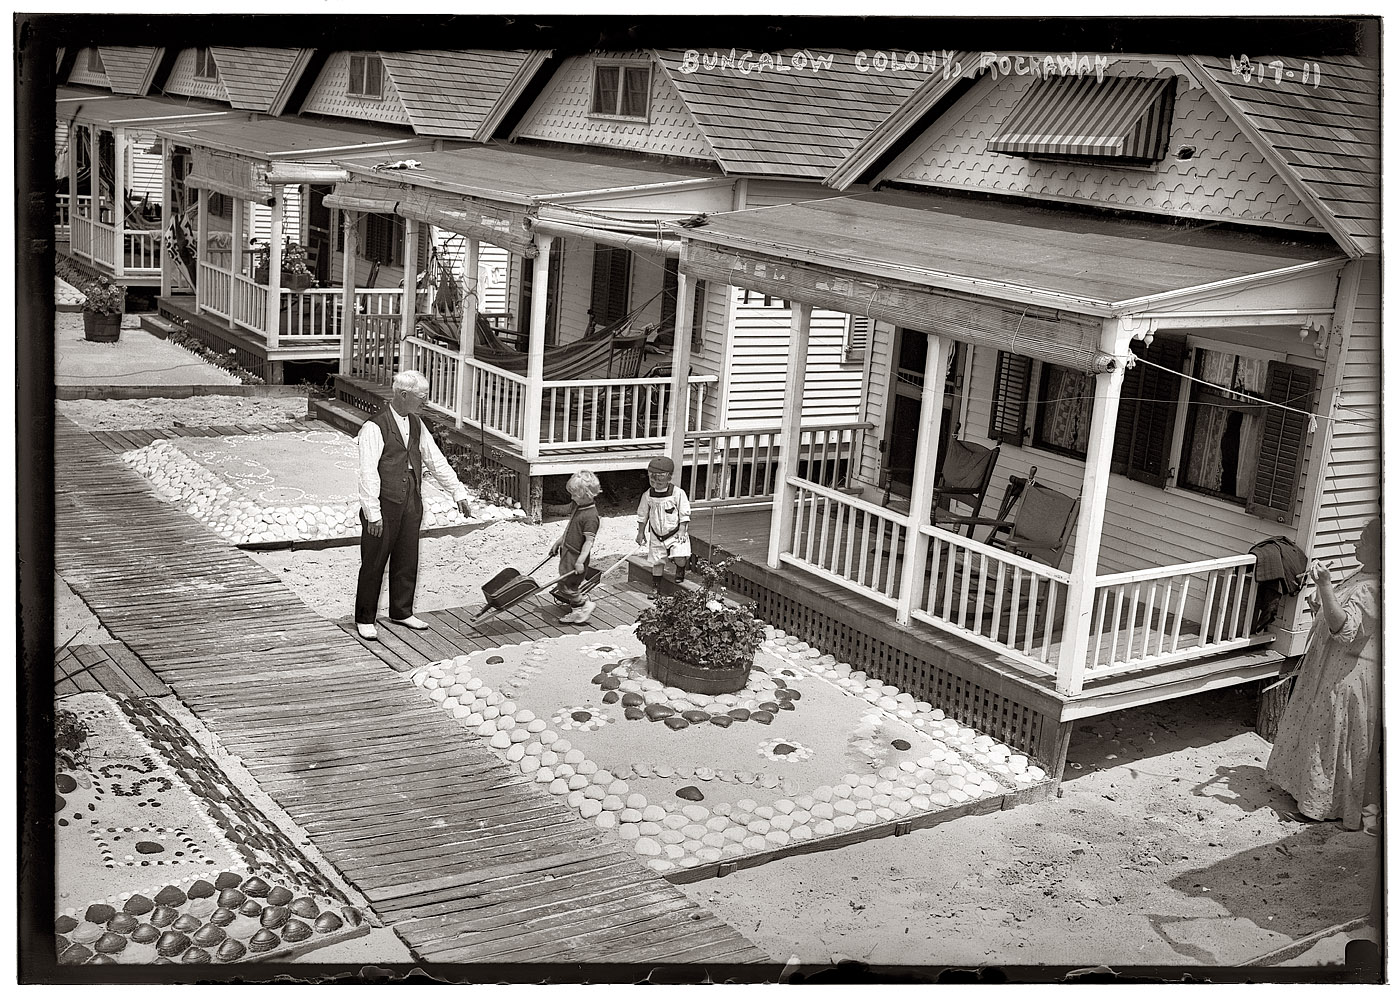 More of the Rockaway bungalow colony in 1910. View full size. 5x7 glass negative, George Grantham Bain Collection.